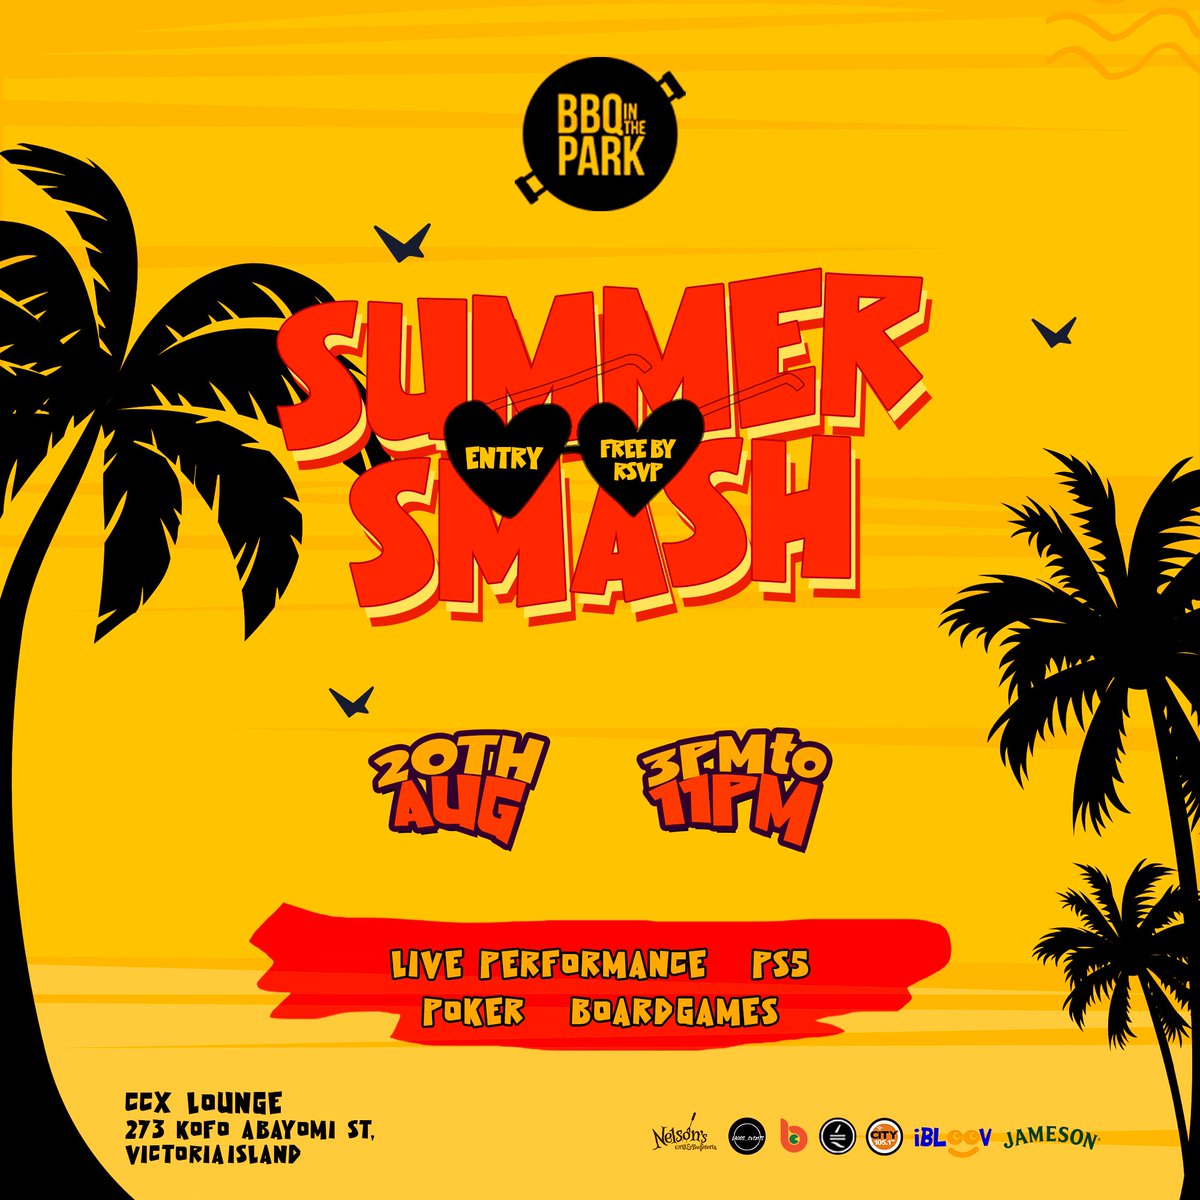 The movement is huge, are you ready for the largest barbeque party this summer ? 

PARTNERS 
@lagos_events
@choccitymusic
@ibloov
@cityfm1051
@jamesonngr 

#BIPsummerSmash
#BbqIndPark